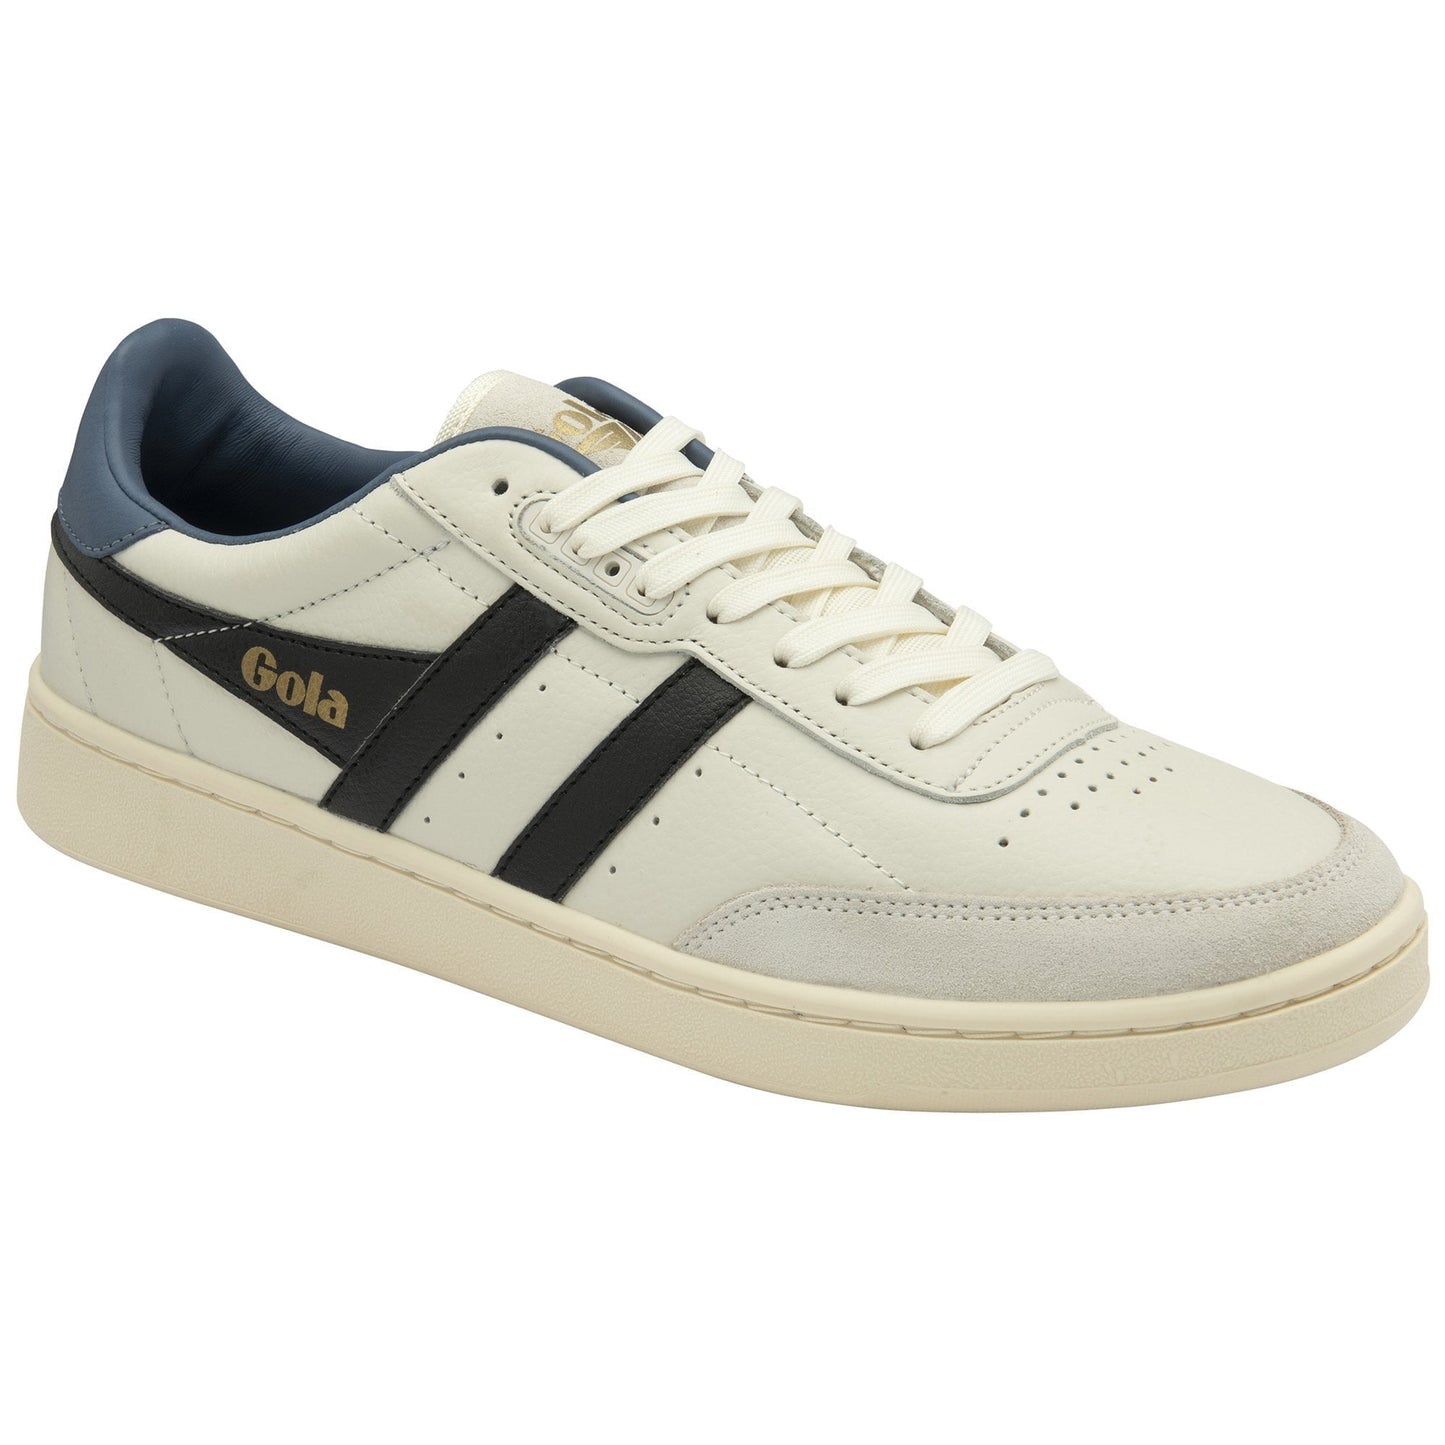 GOLA MEN'S CONTACT LEATHER SNEAKERS